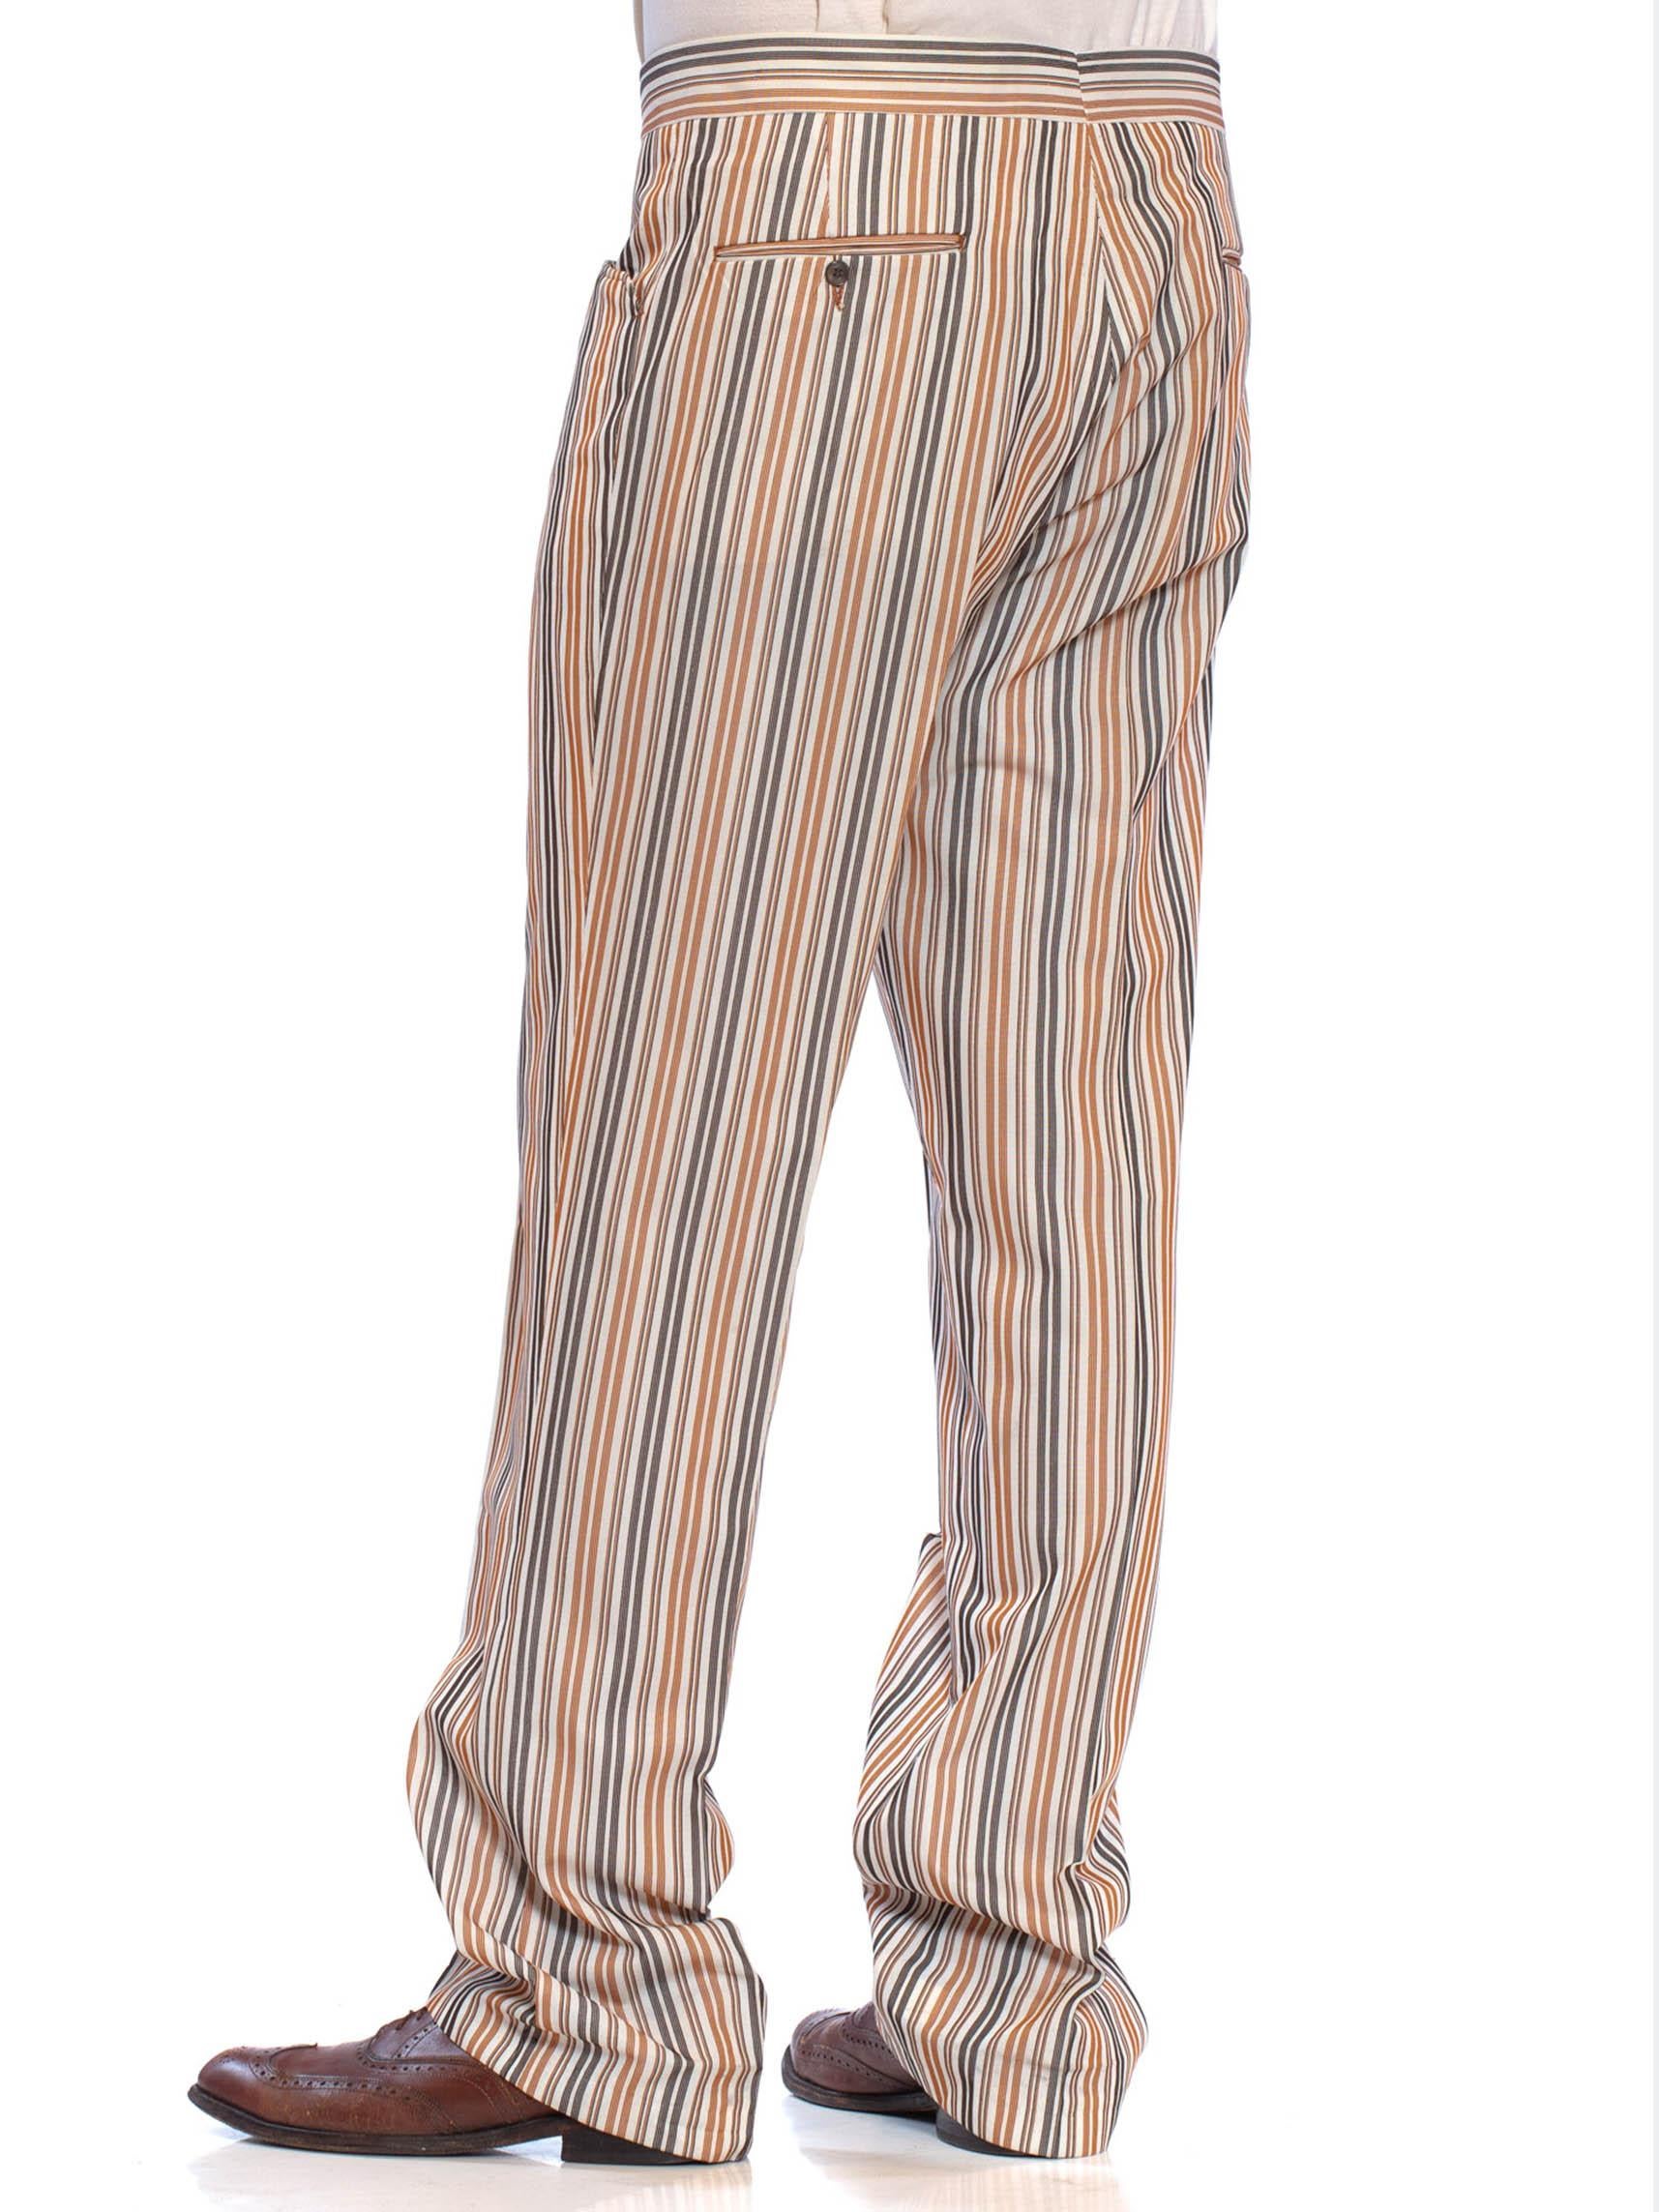 1960S GLEN OAKS Striped Polyester Men's Pants In Excellent Condition For Sale In New York, NY